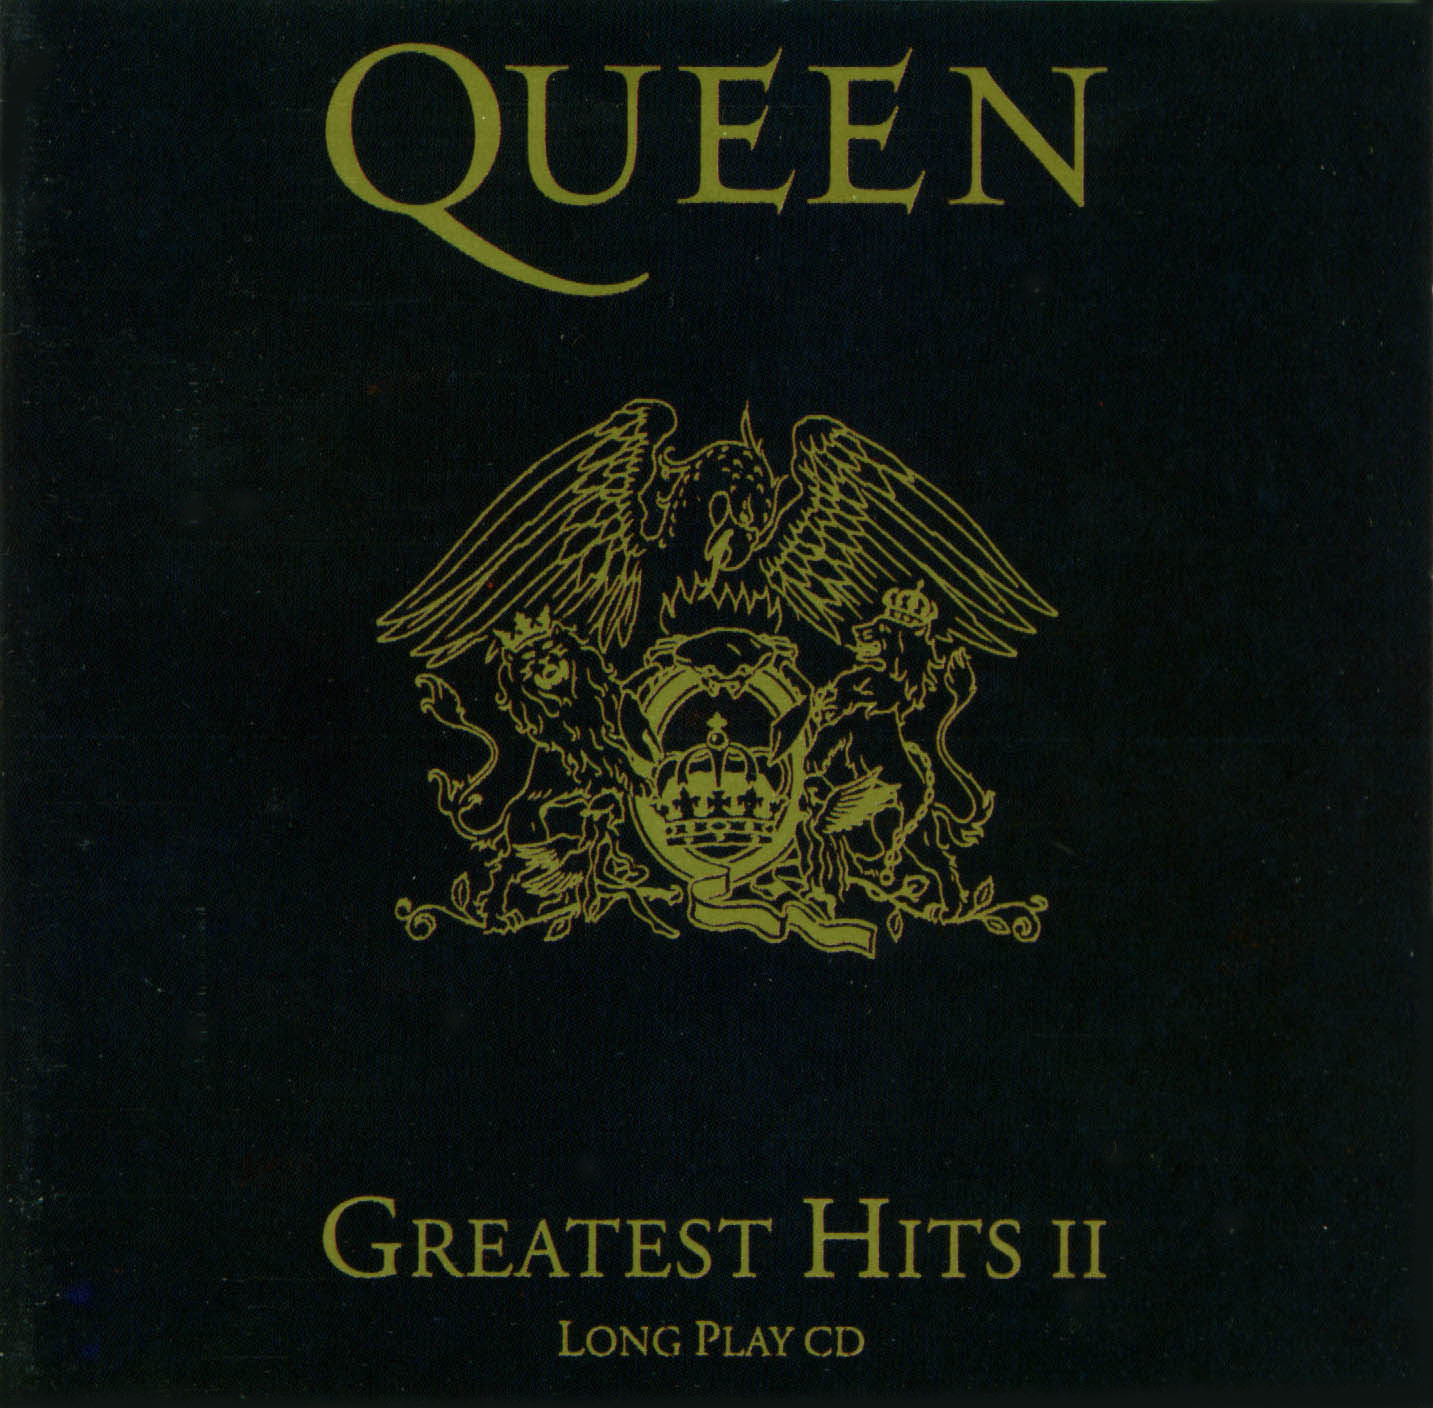 Queen - Greatest Hits 2 1 hour 20 minutes long - YouTube